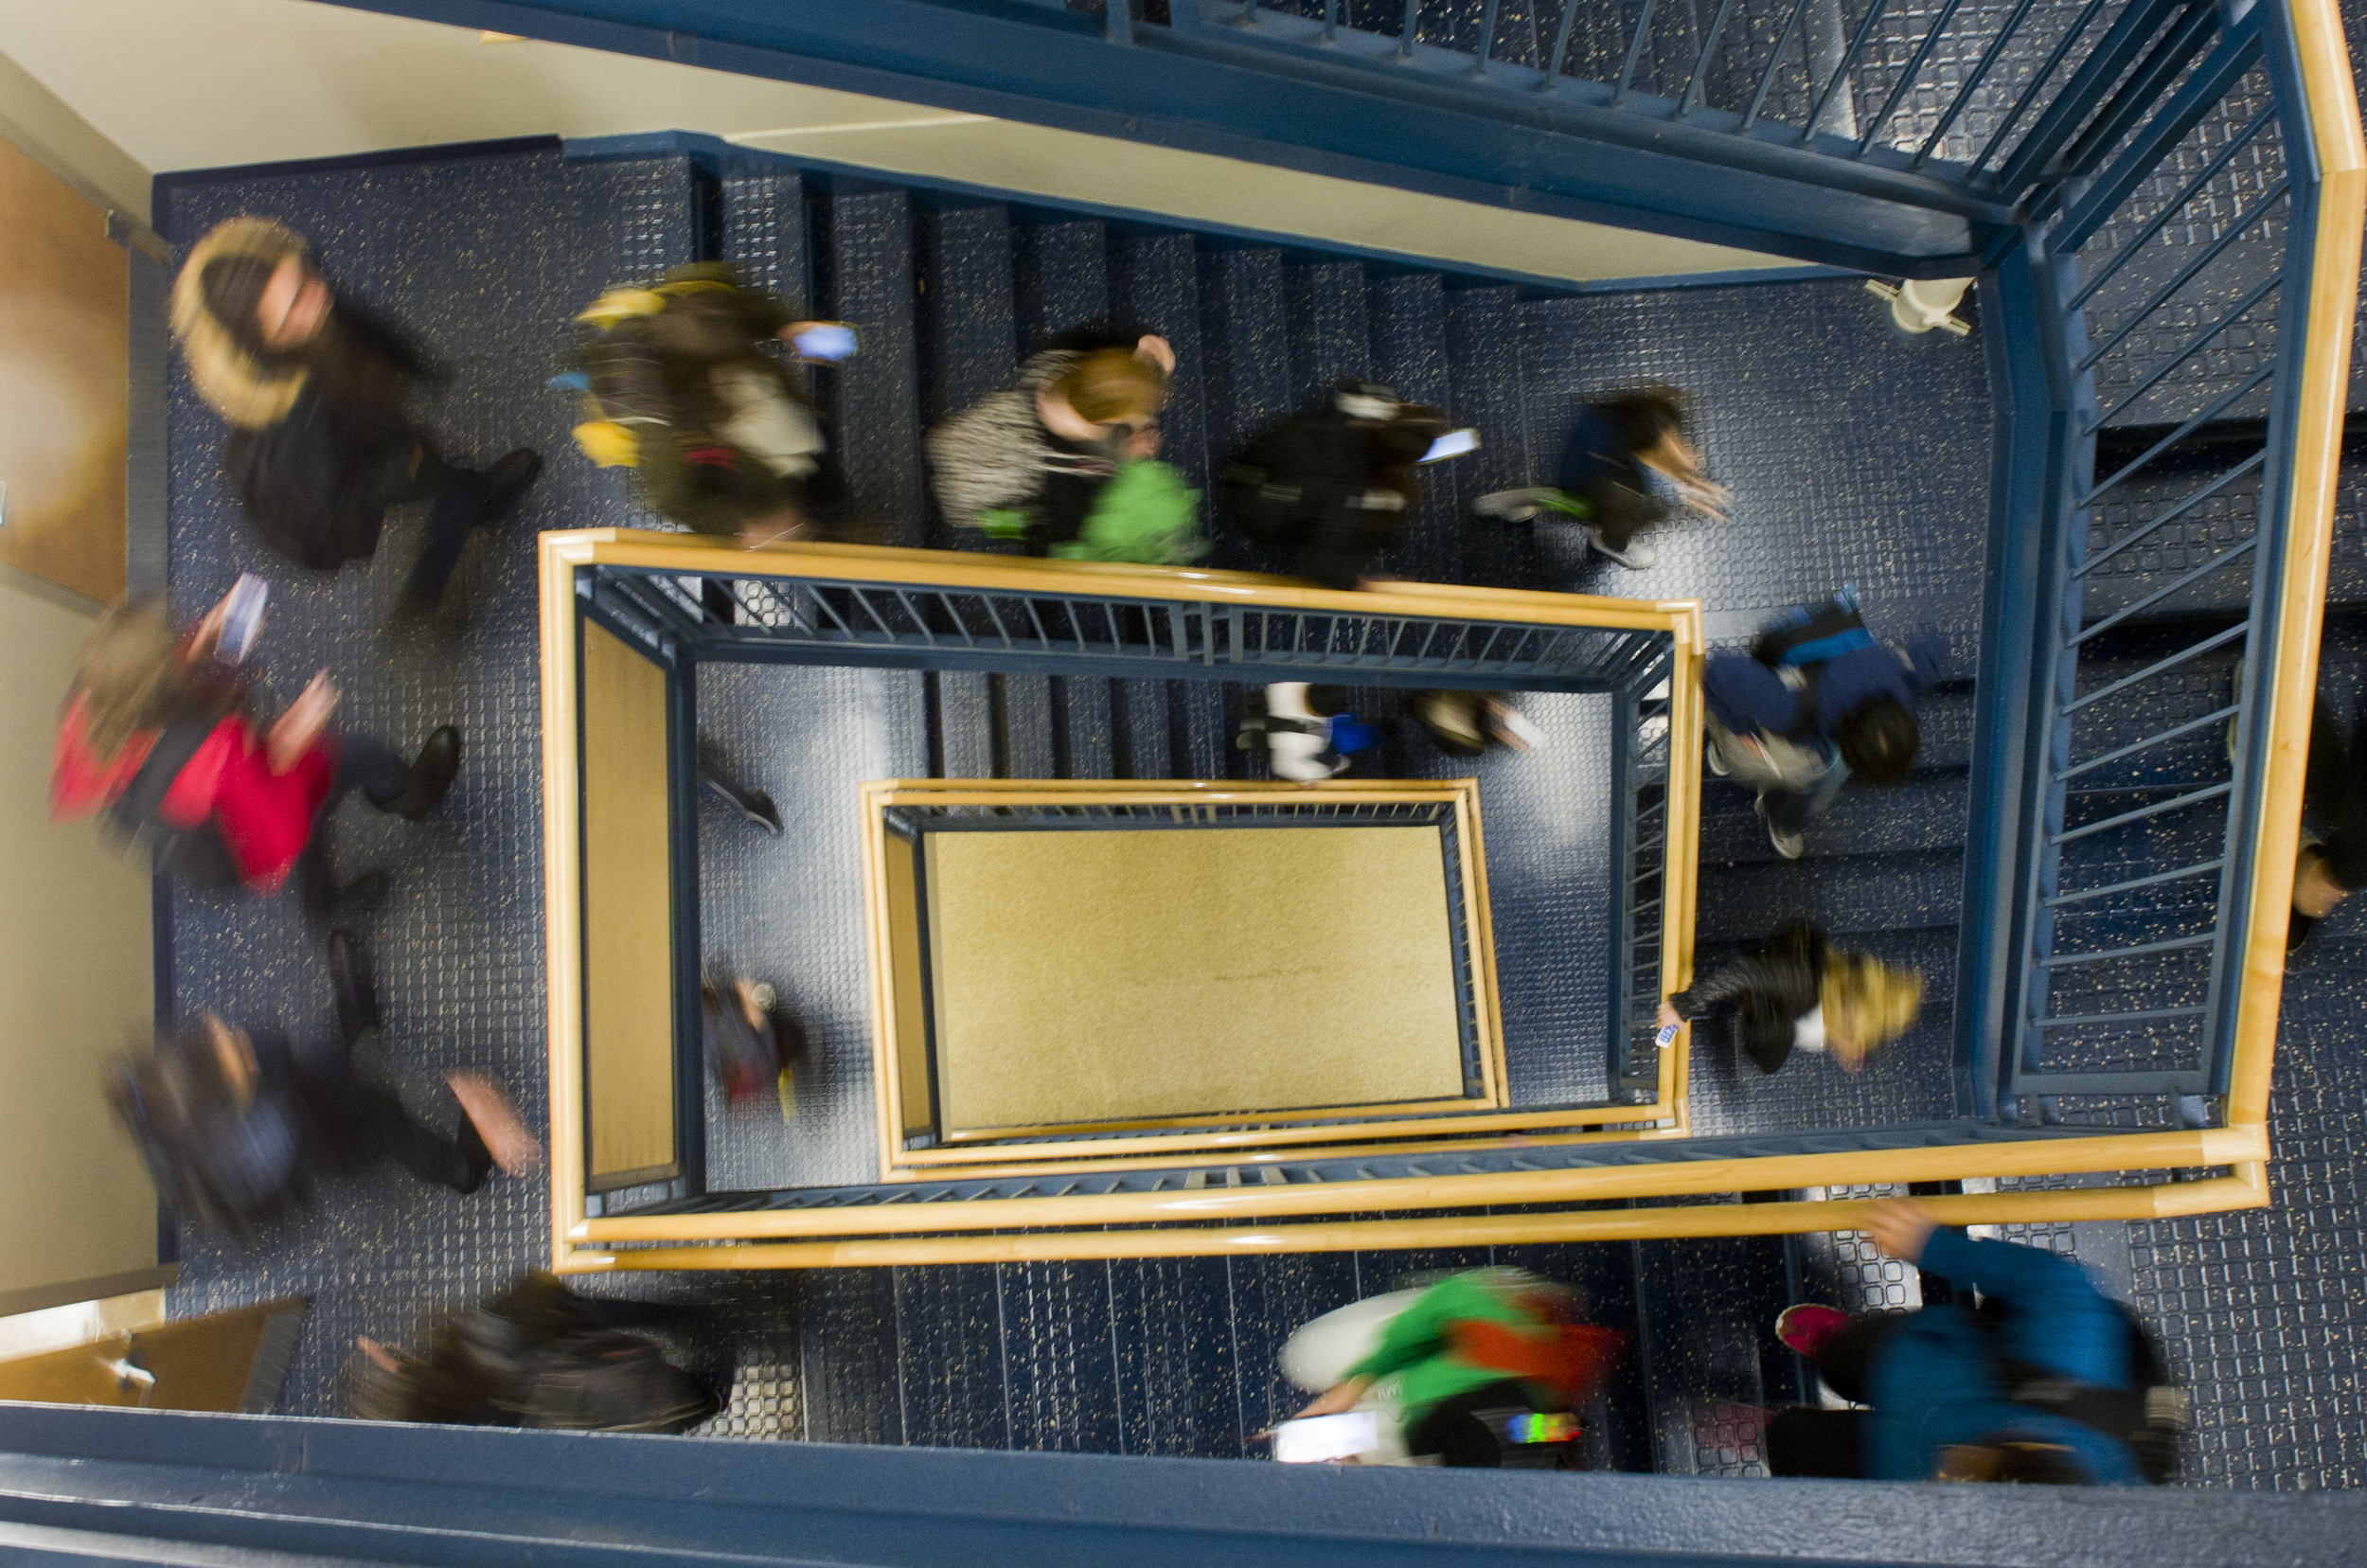  Students hit the stairs between classes at CGS November 6, 2014.&nbsp;Photo by Cydney Scott for Boston University Photography 